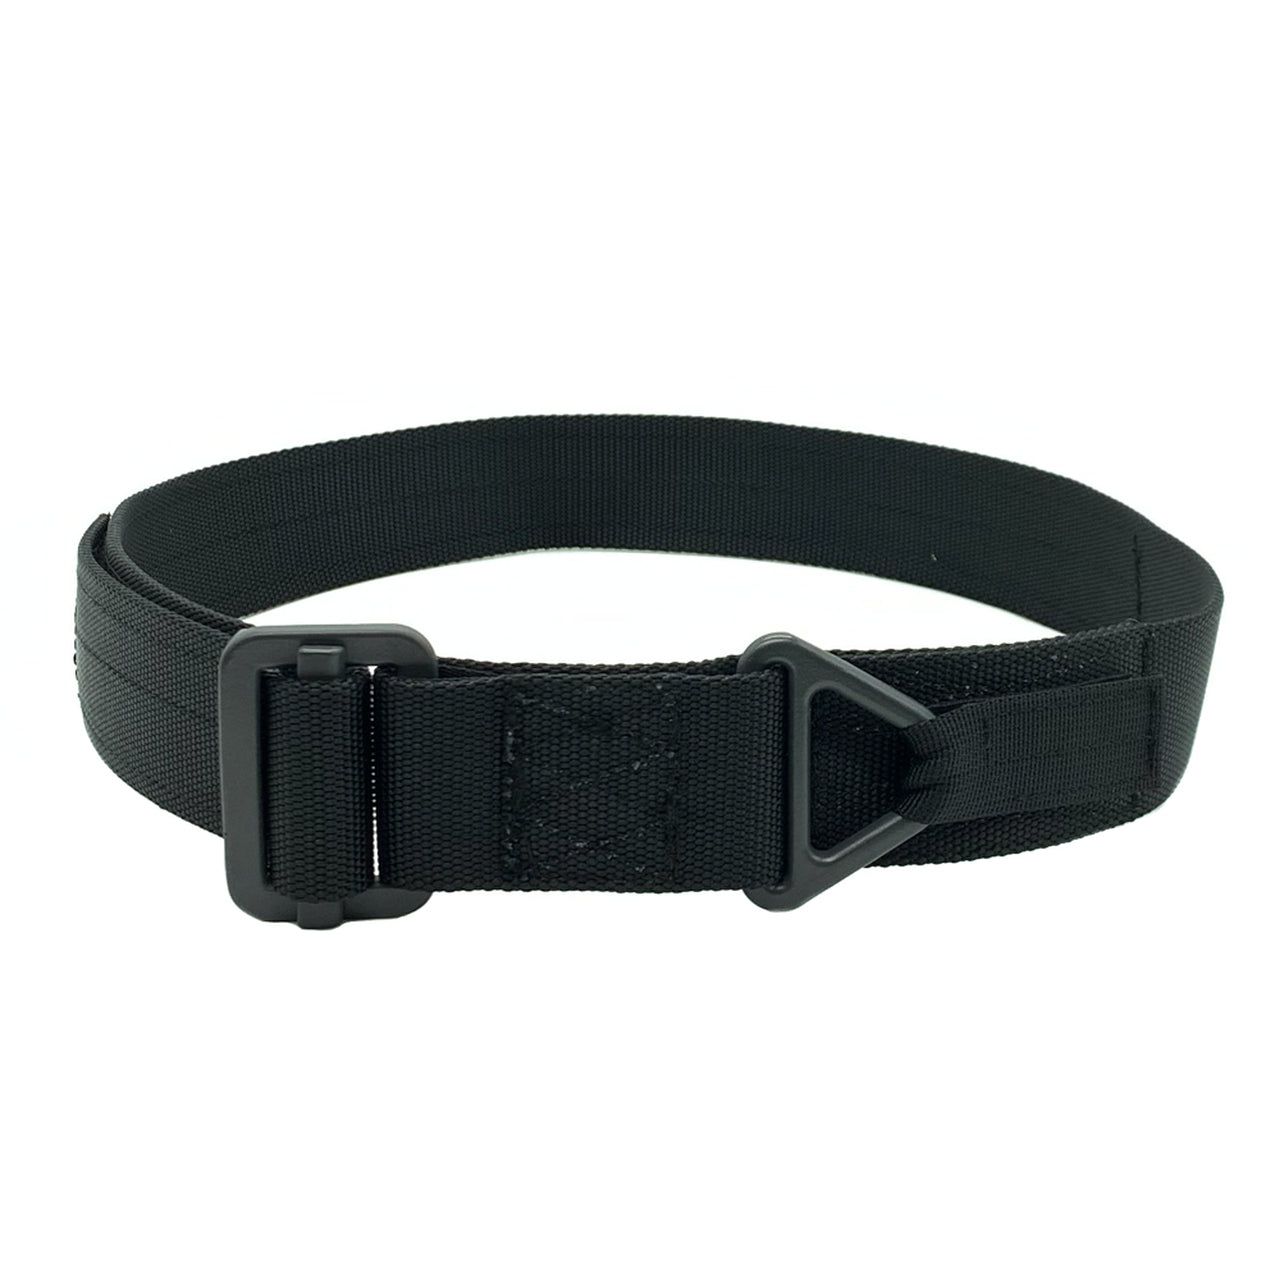 A Shellback Tactical Riggers Belt with an adjustable buckle.